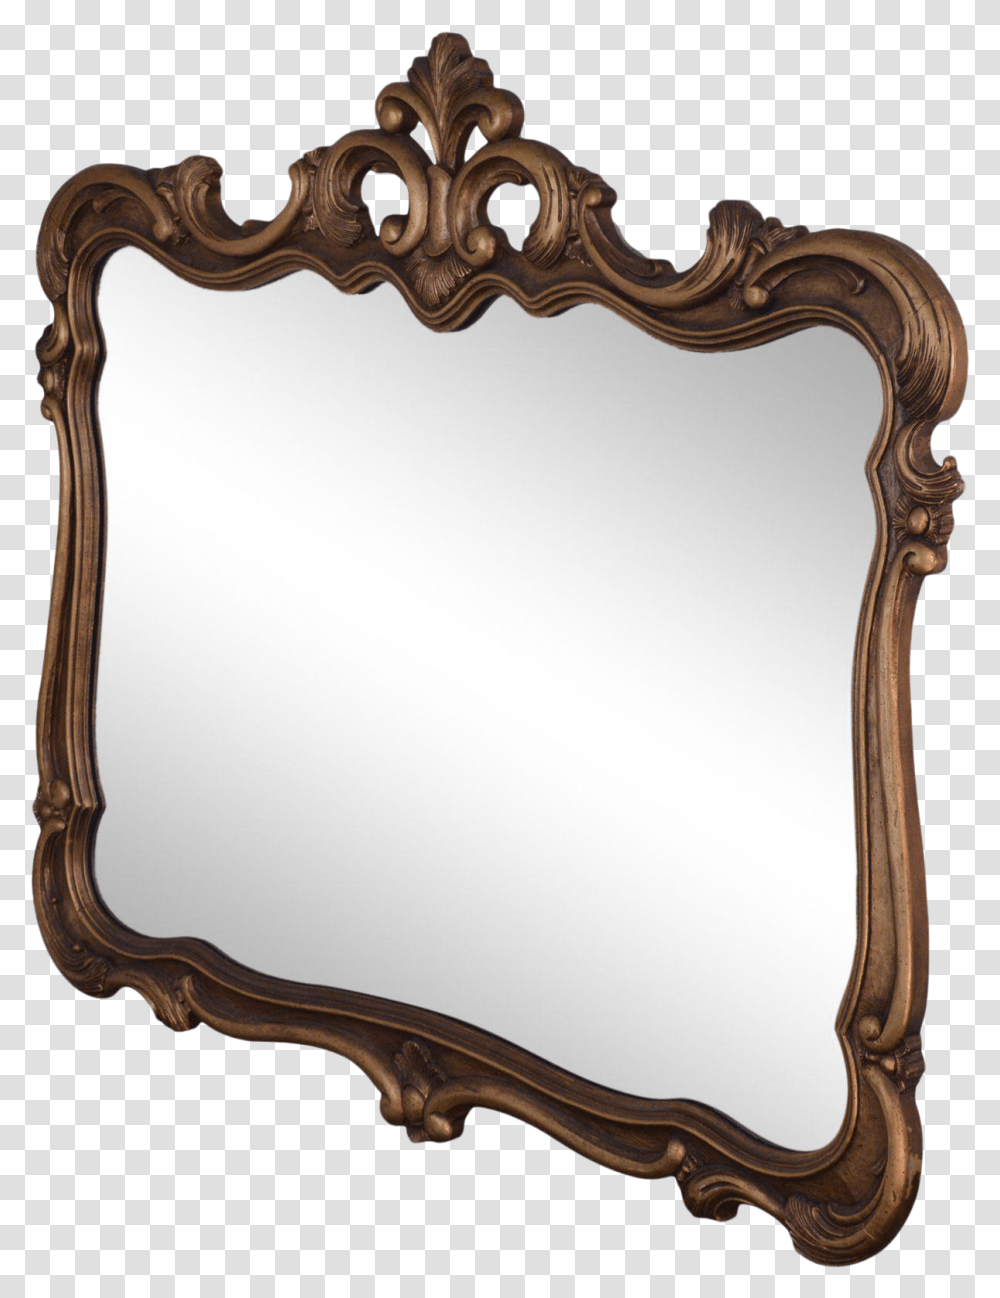 Vintage French Louis Xv Style Gold Frame Wall Mirror Crowned Top Transparent Png